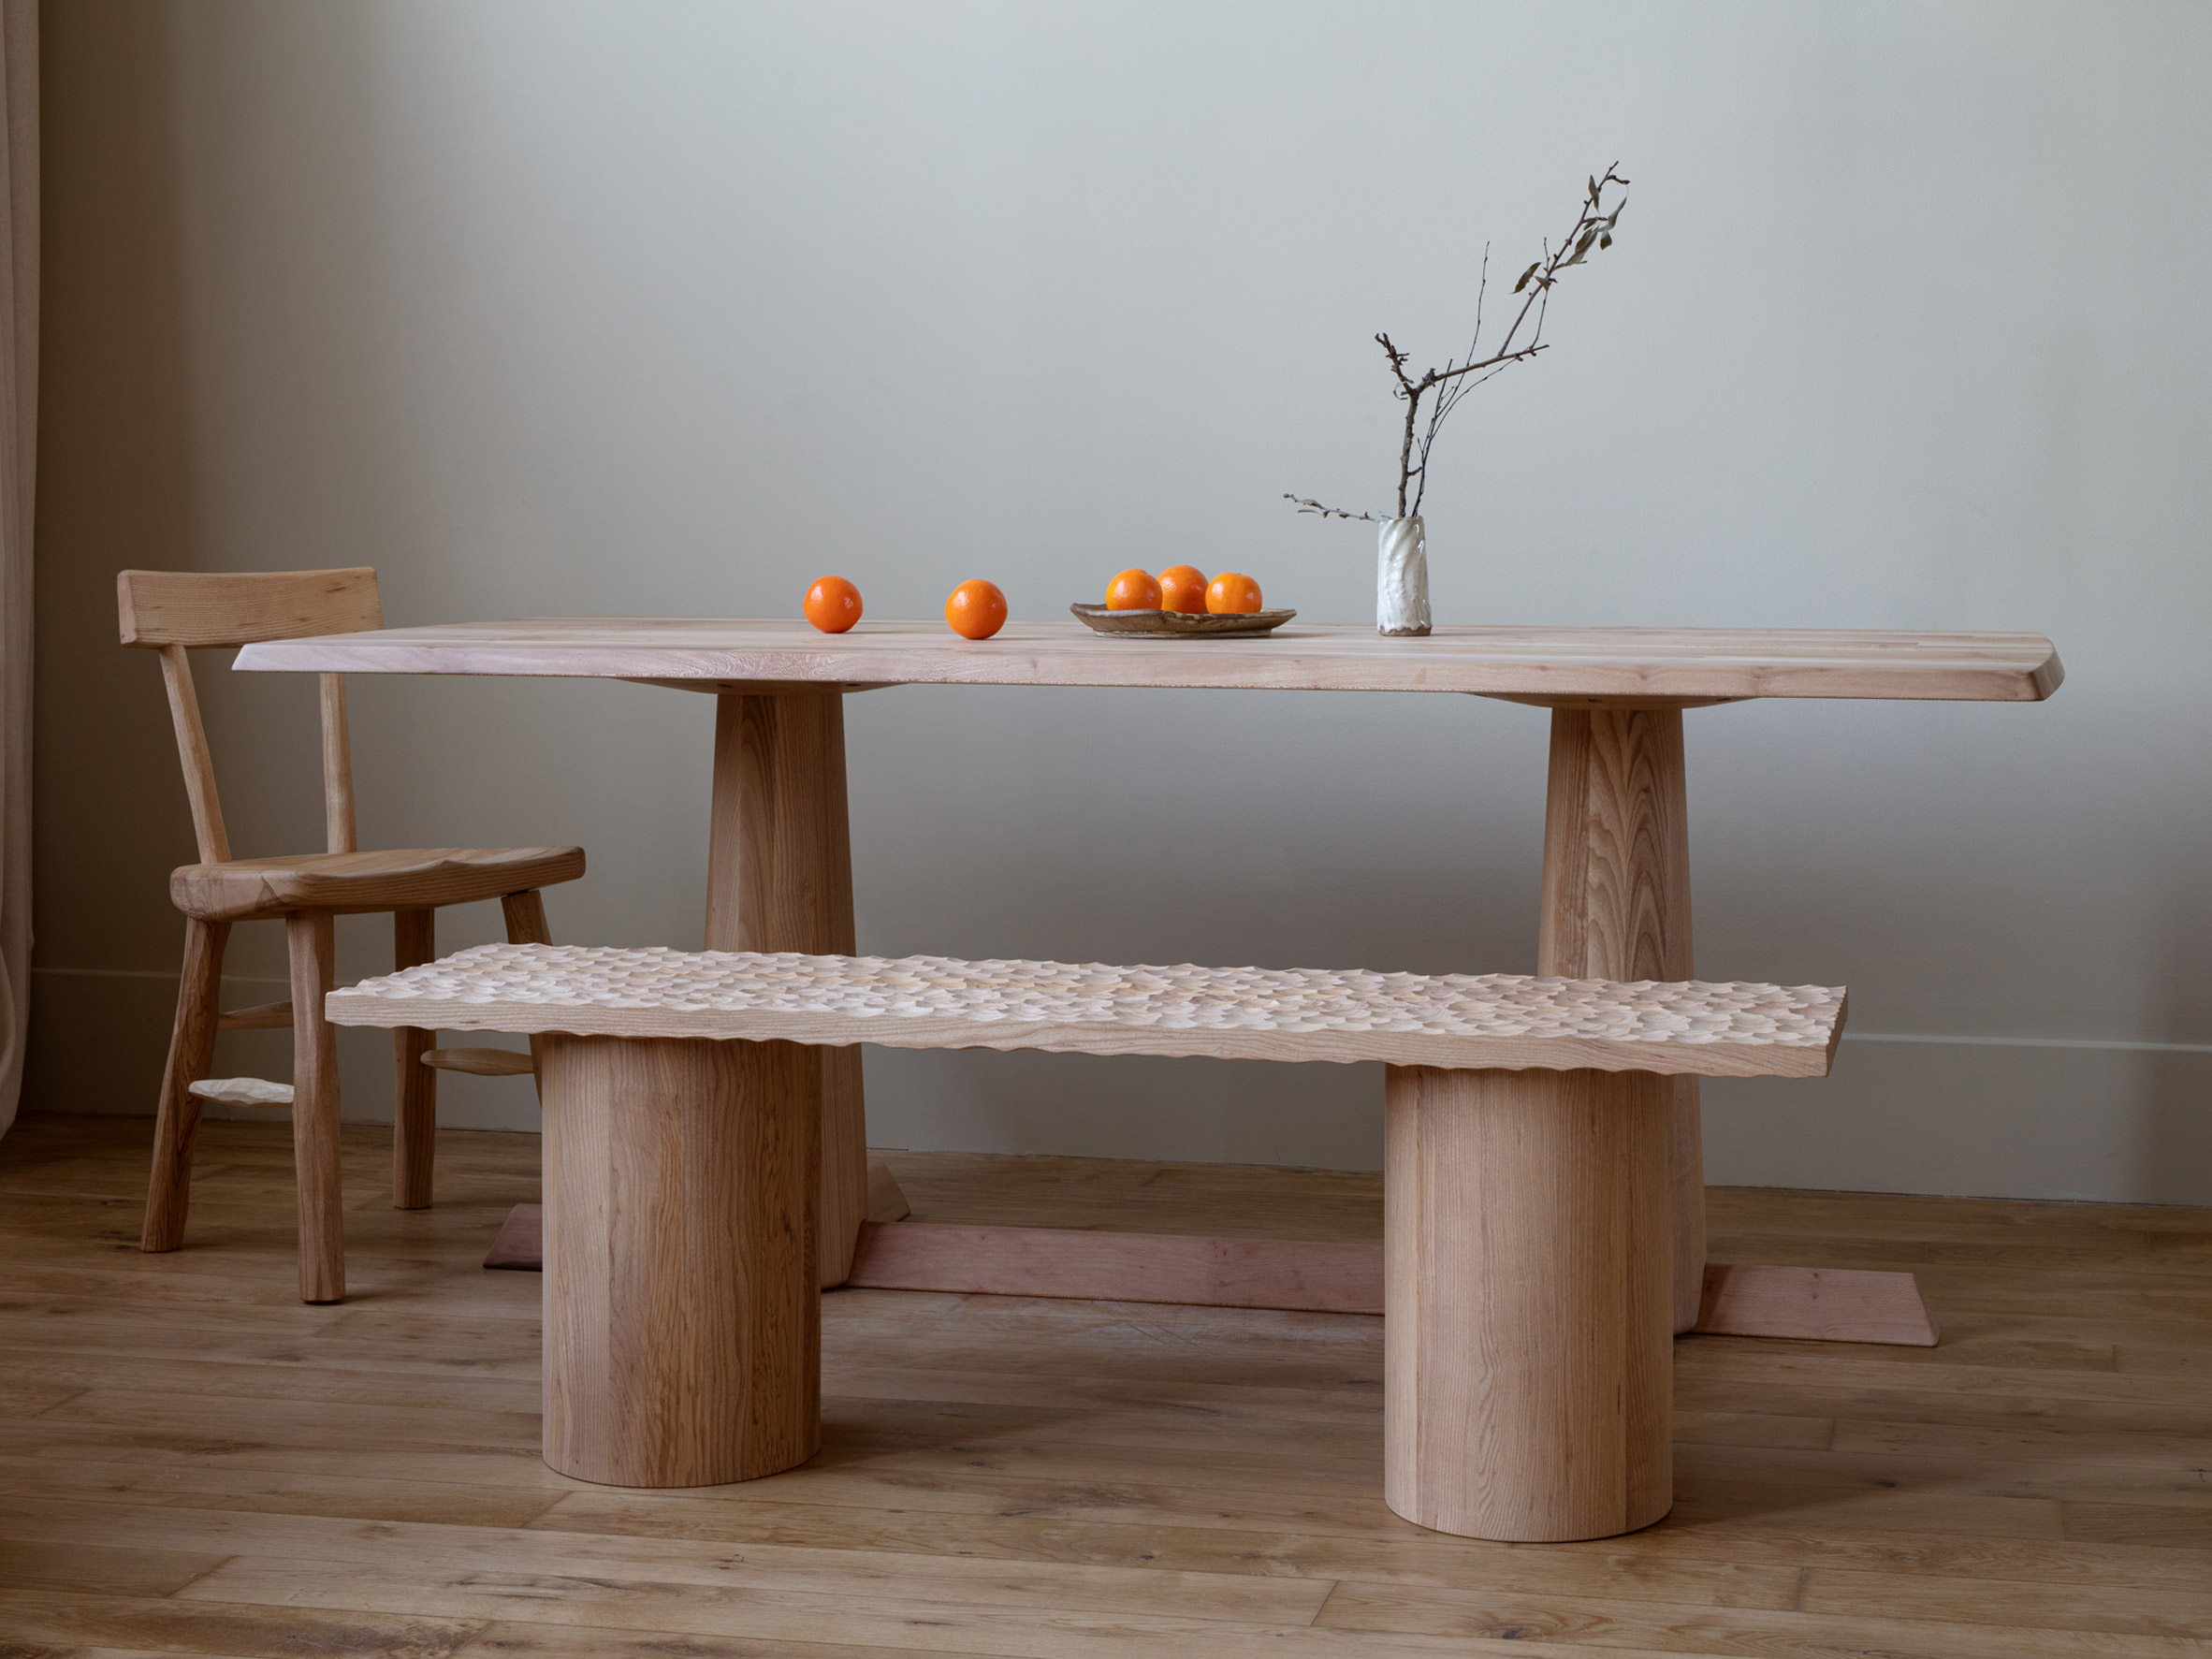 Dining table set up with rippled bench by Jan Hendzel